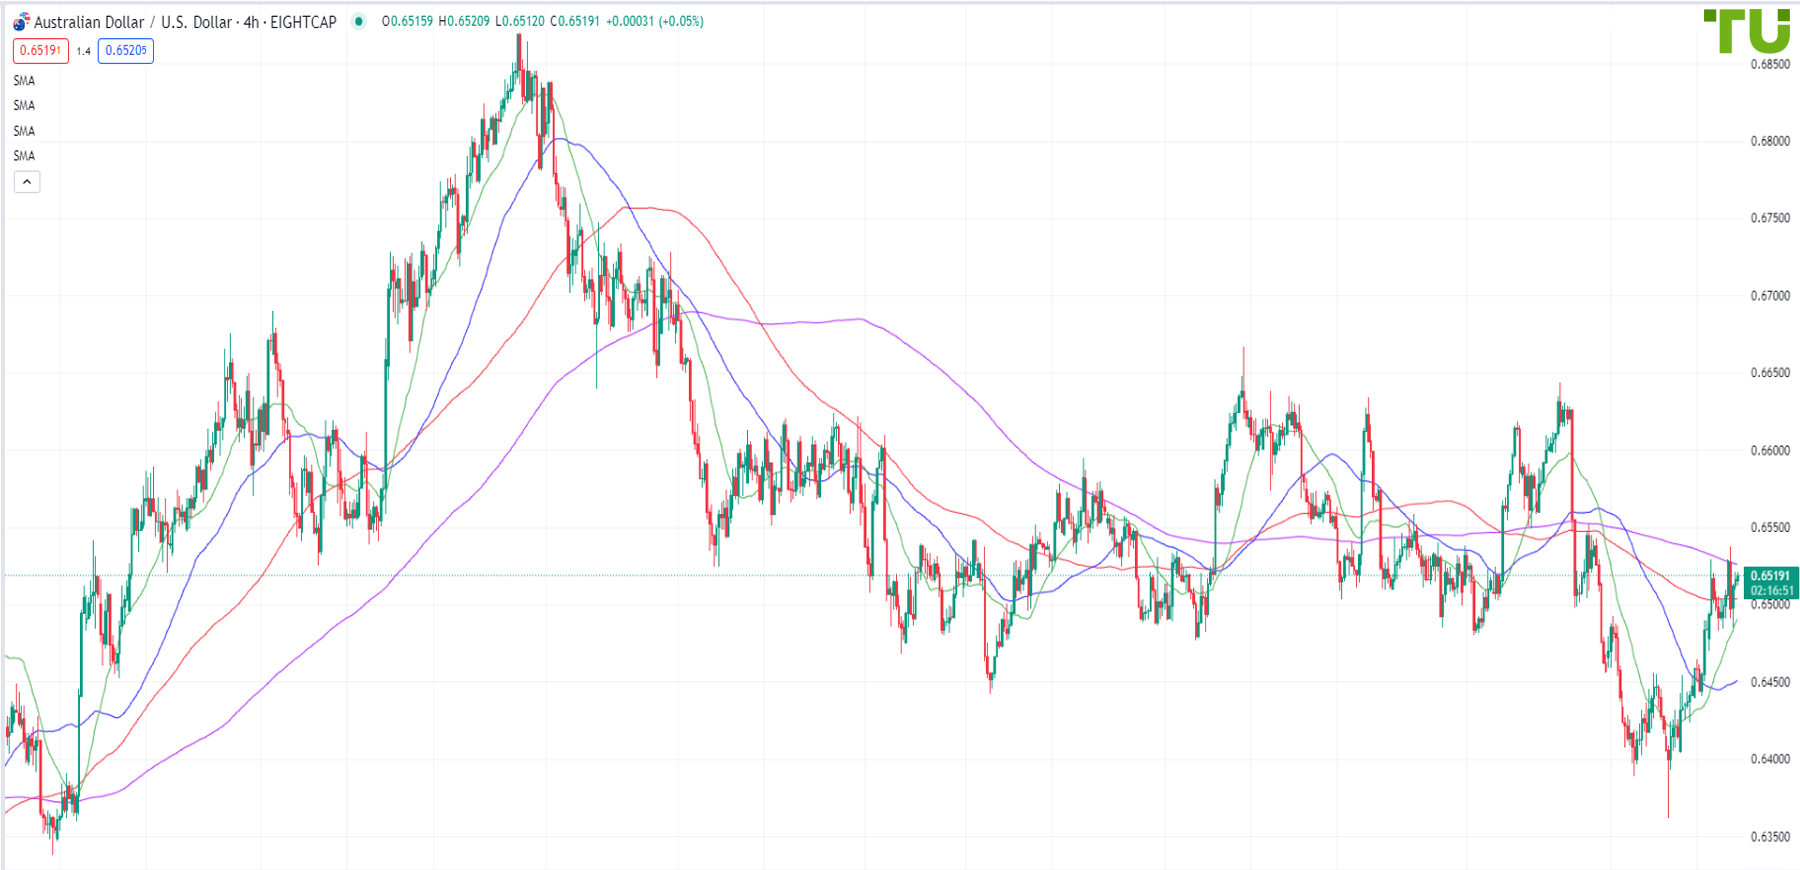 AUD/USD is bought again from 0.6490 support